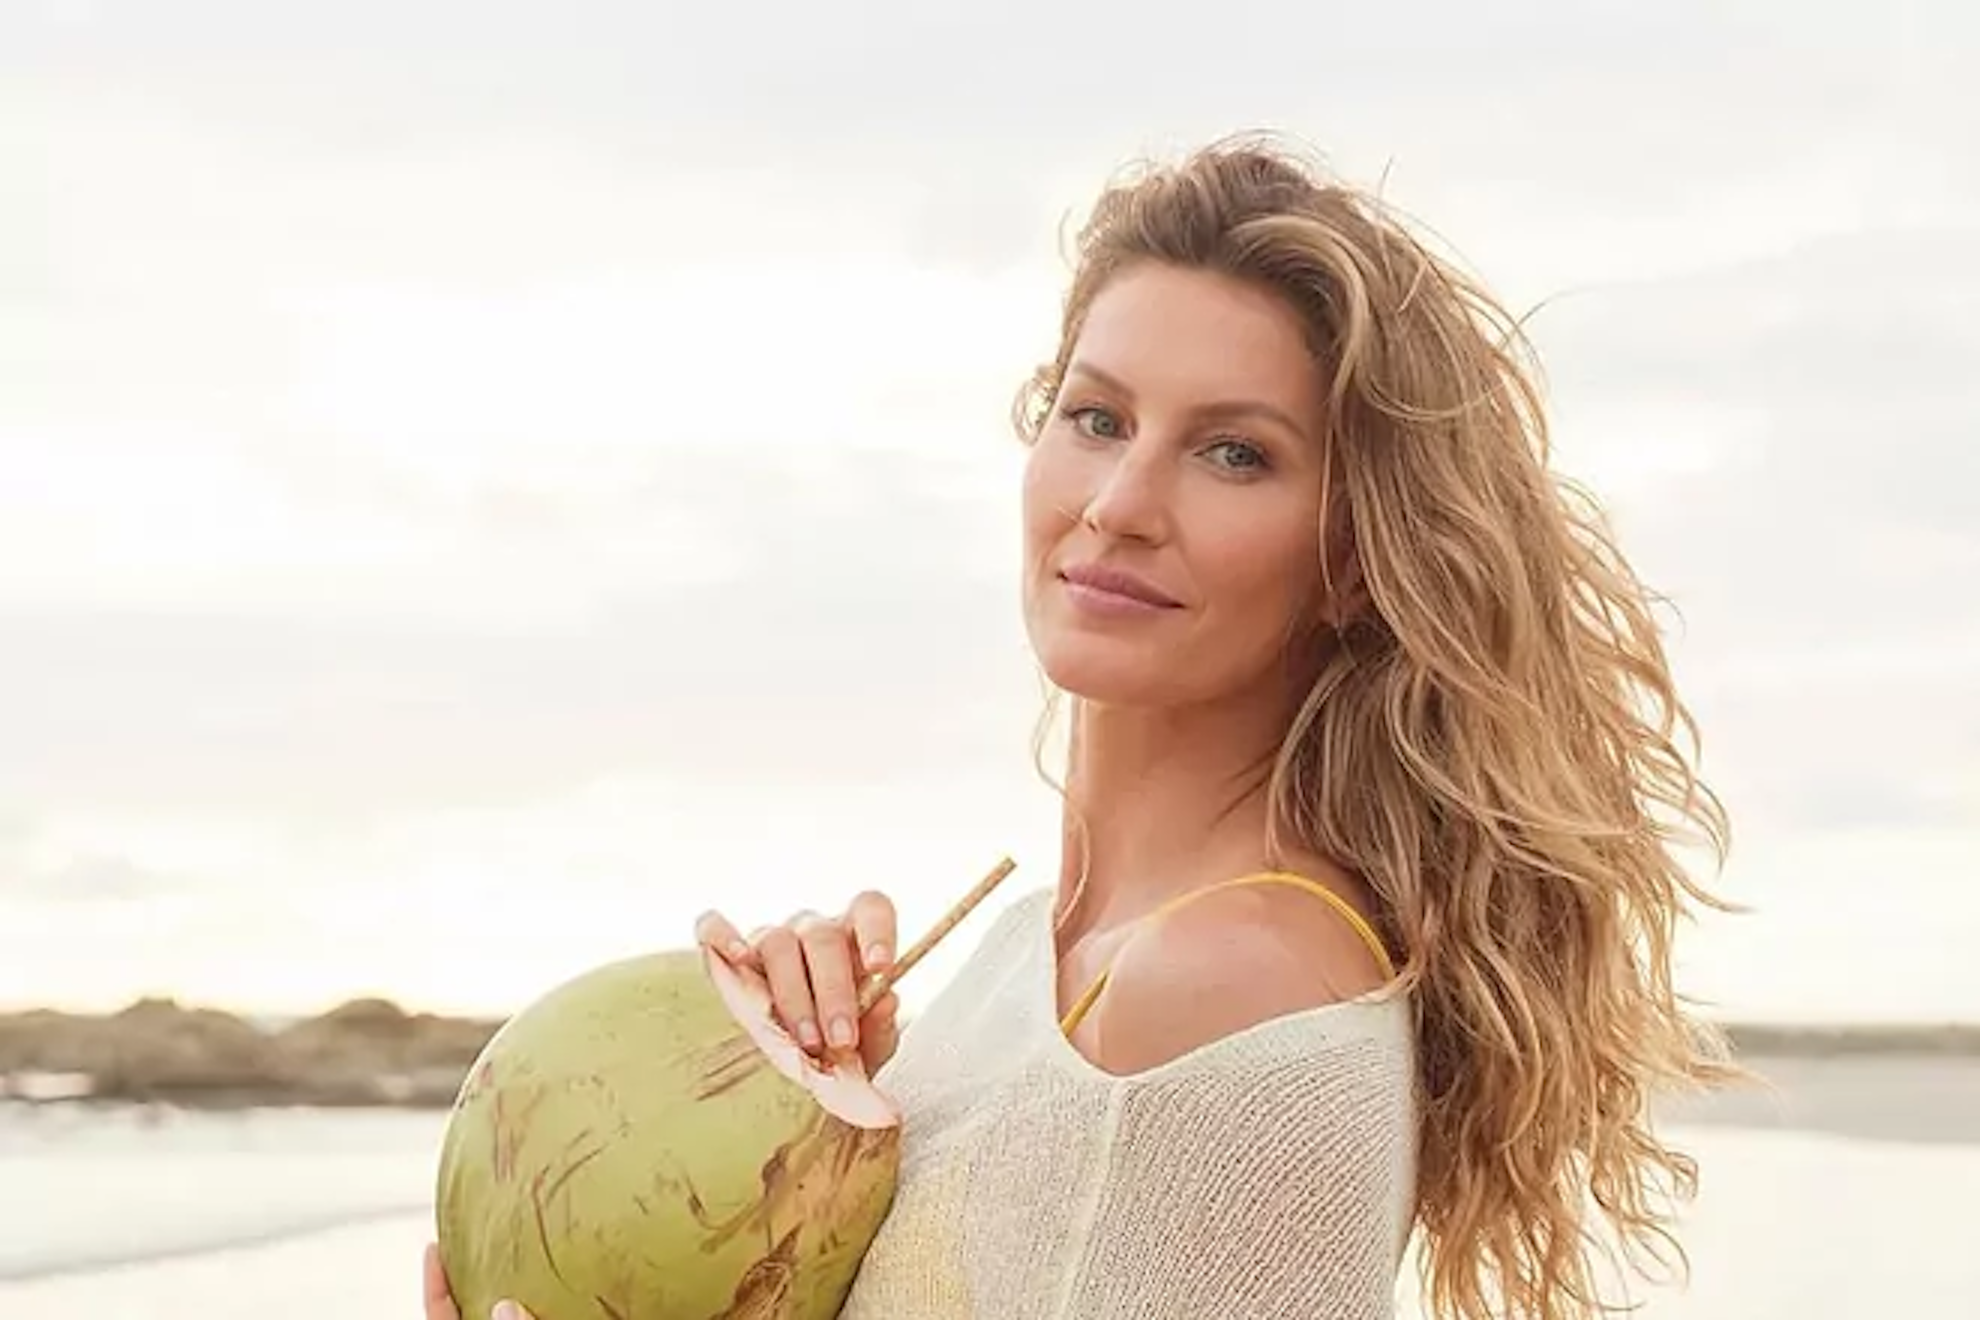 Gisele Bundchen shares cryptic quote amid healing process after divorce from Tom Brady